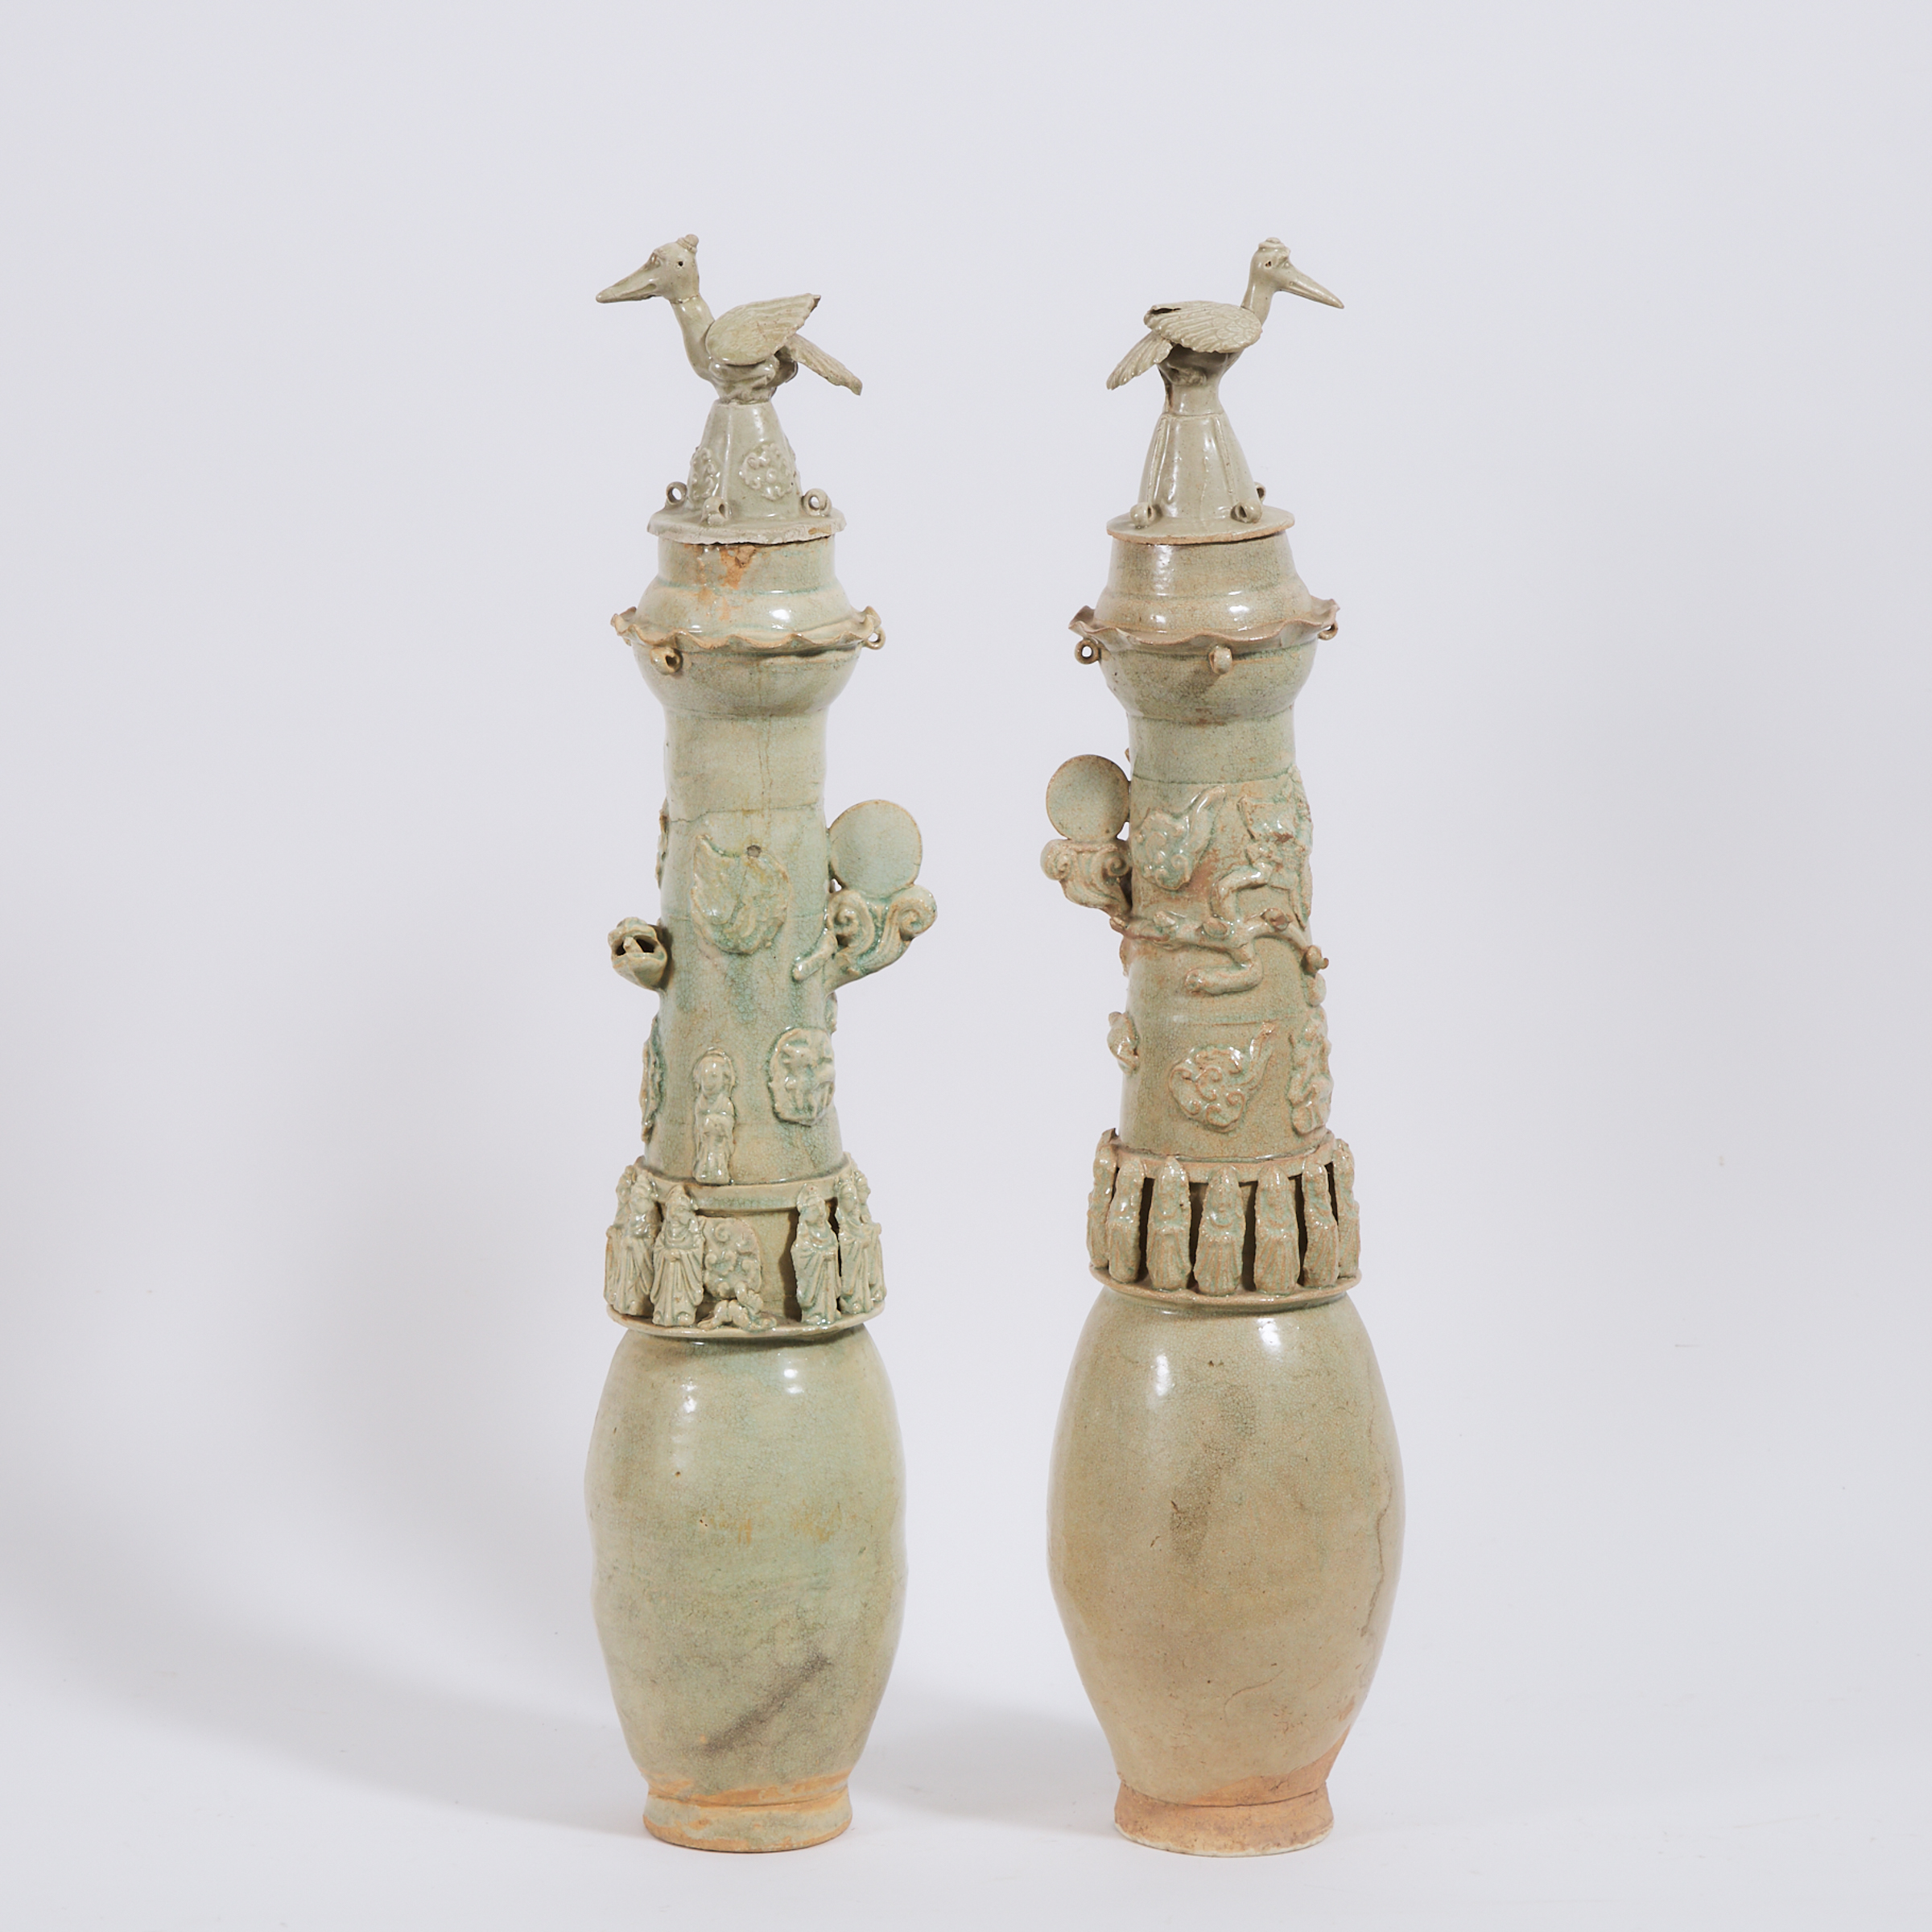 A Pair of Tall Straw-Glazed Pottery Funerary Urns and Covers, Song Dynasty (AD 960-1279)